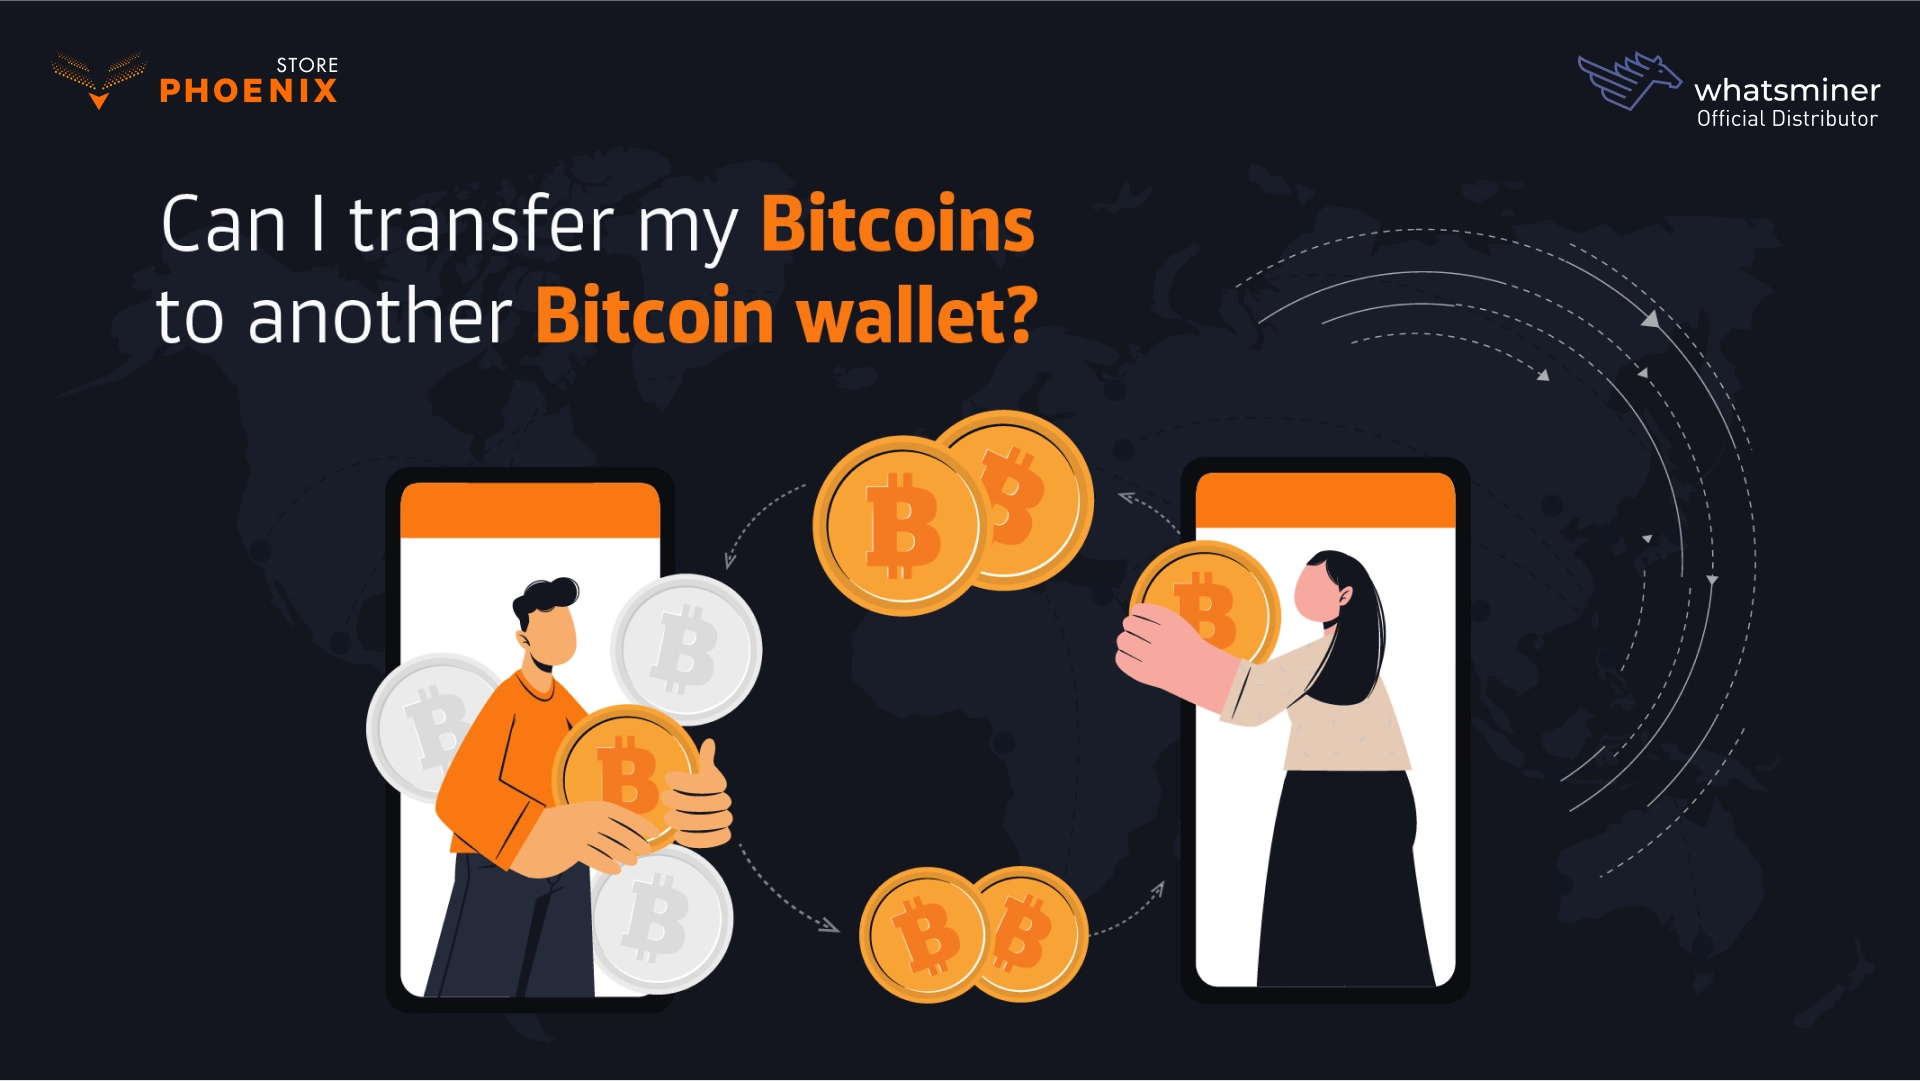 Can I transfer my bitcoins to another bitcoin wallet?